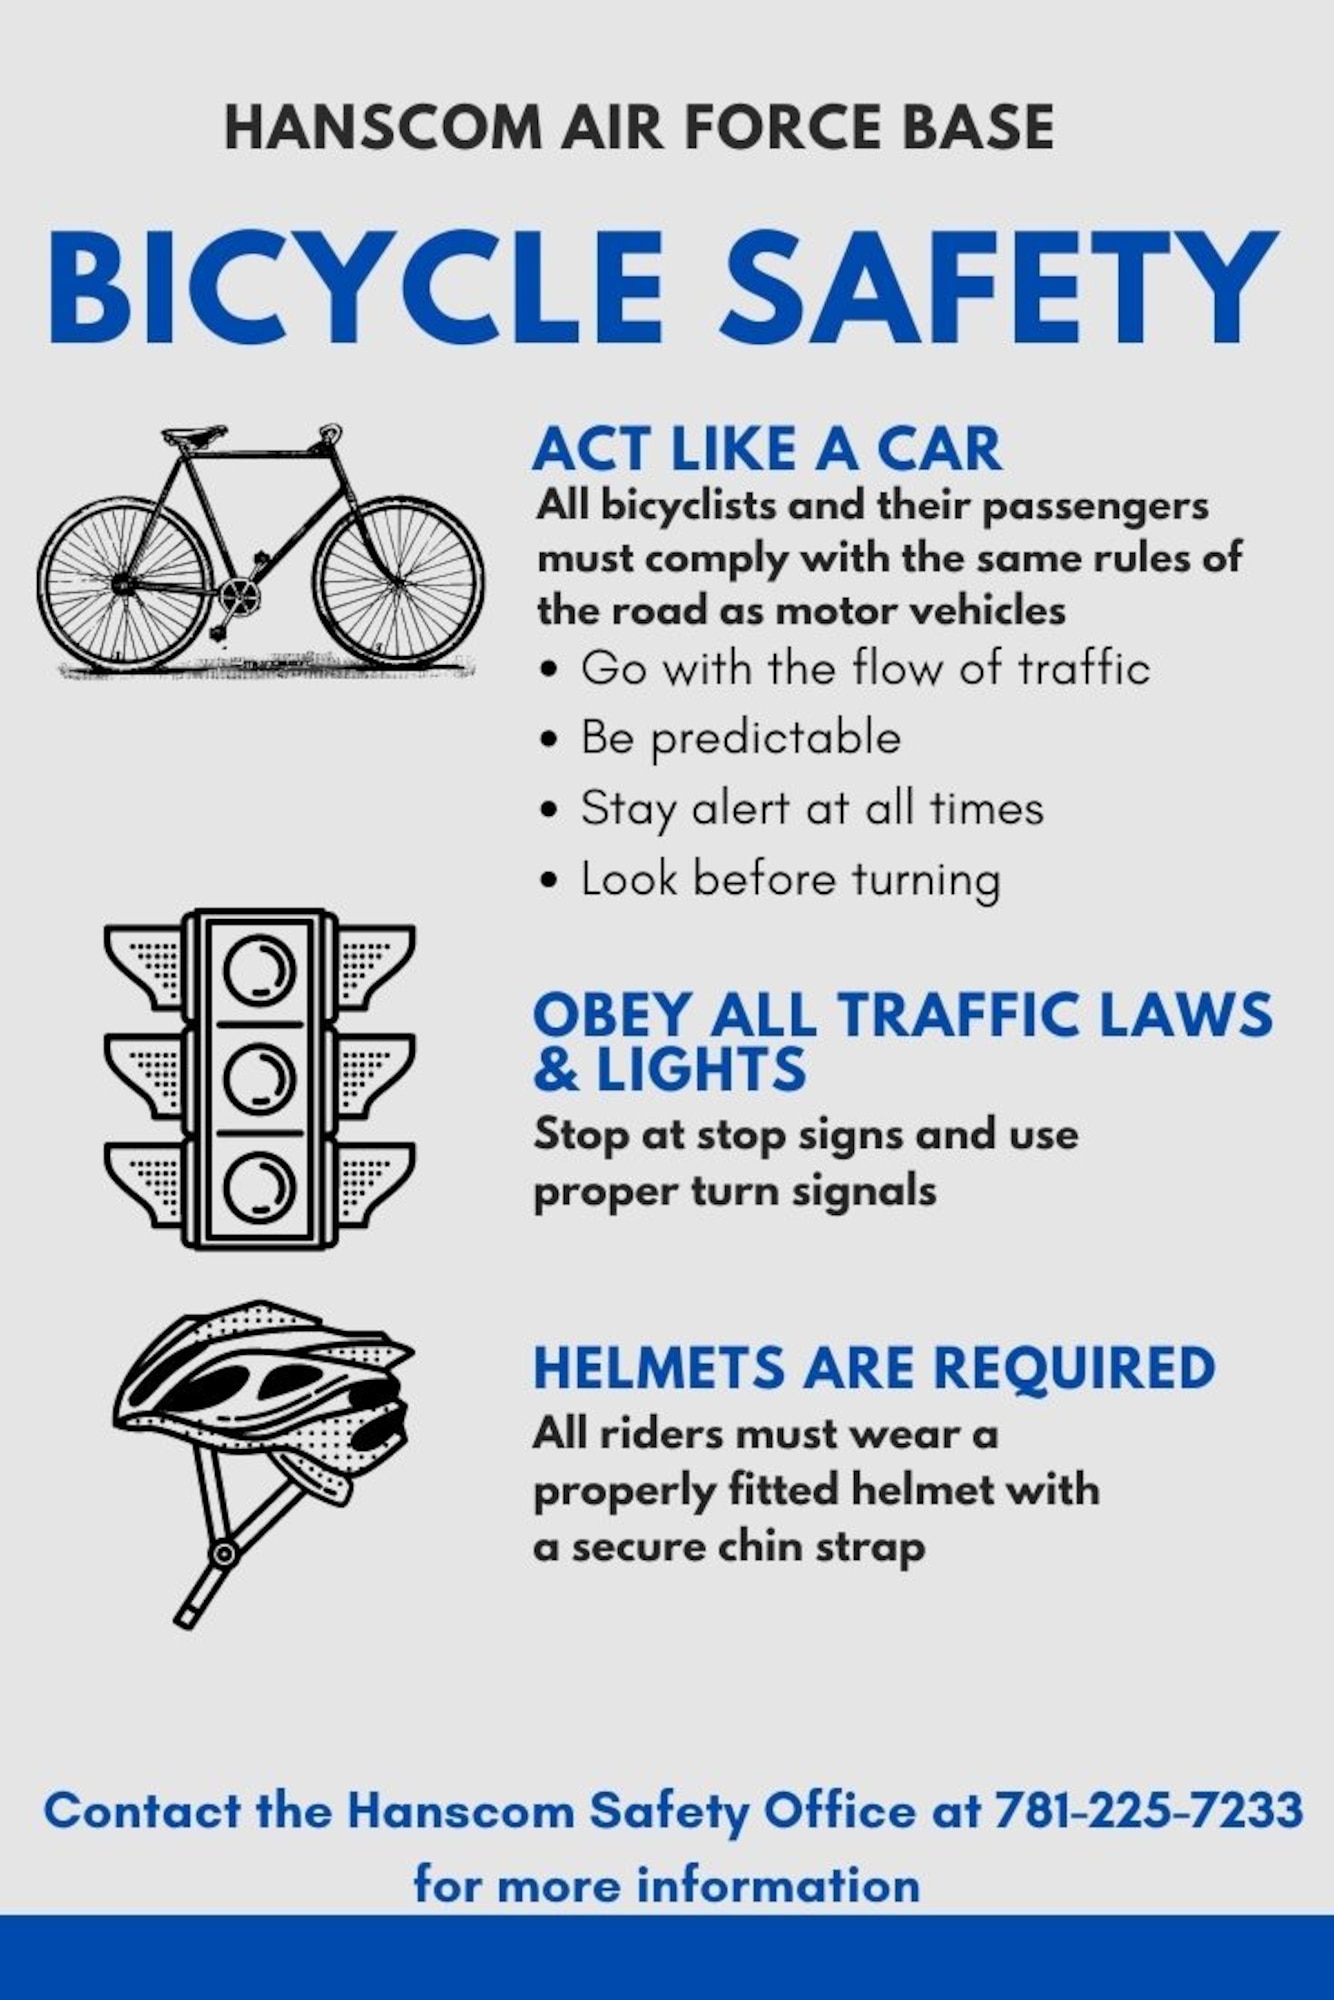 All bicyclists at Hanscom Air Force Base, Mass., must comply with all guidance and regulations for vehicle operations as well adhere to all posted road signs. (U.S. Air Force graphic by Lauren Russell)